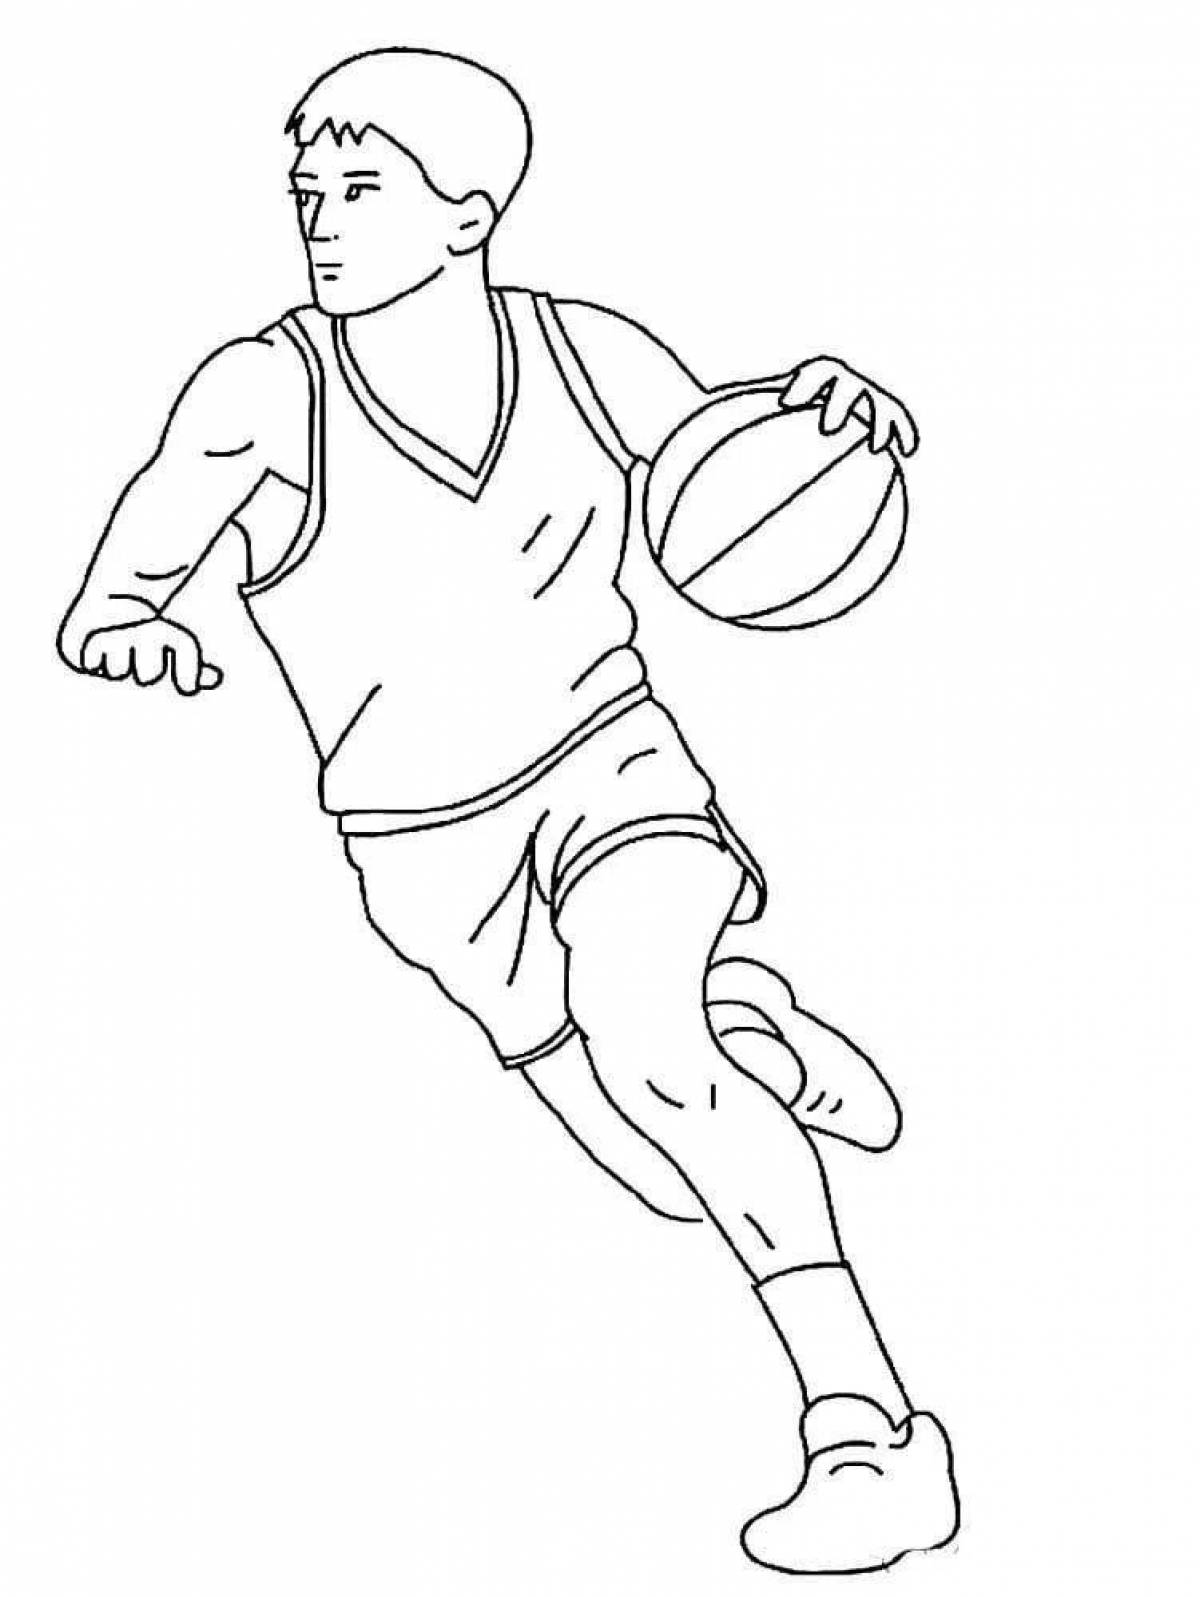 Athletes funny coloring pages